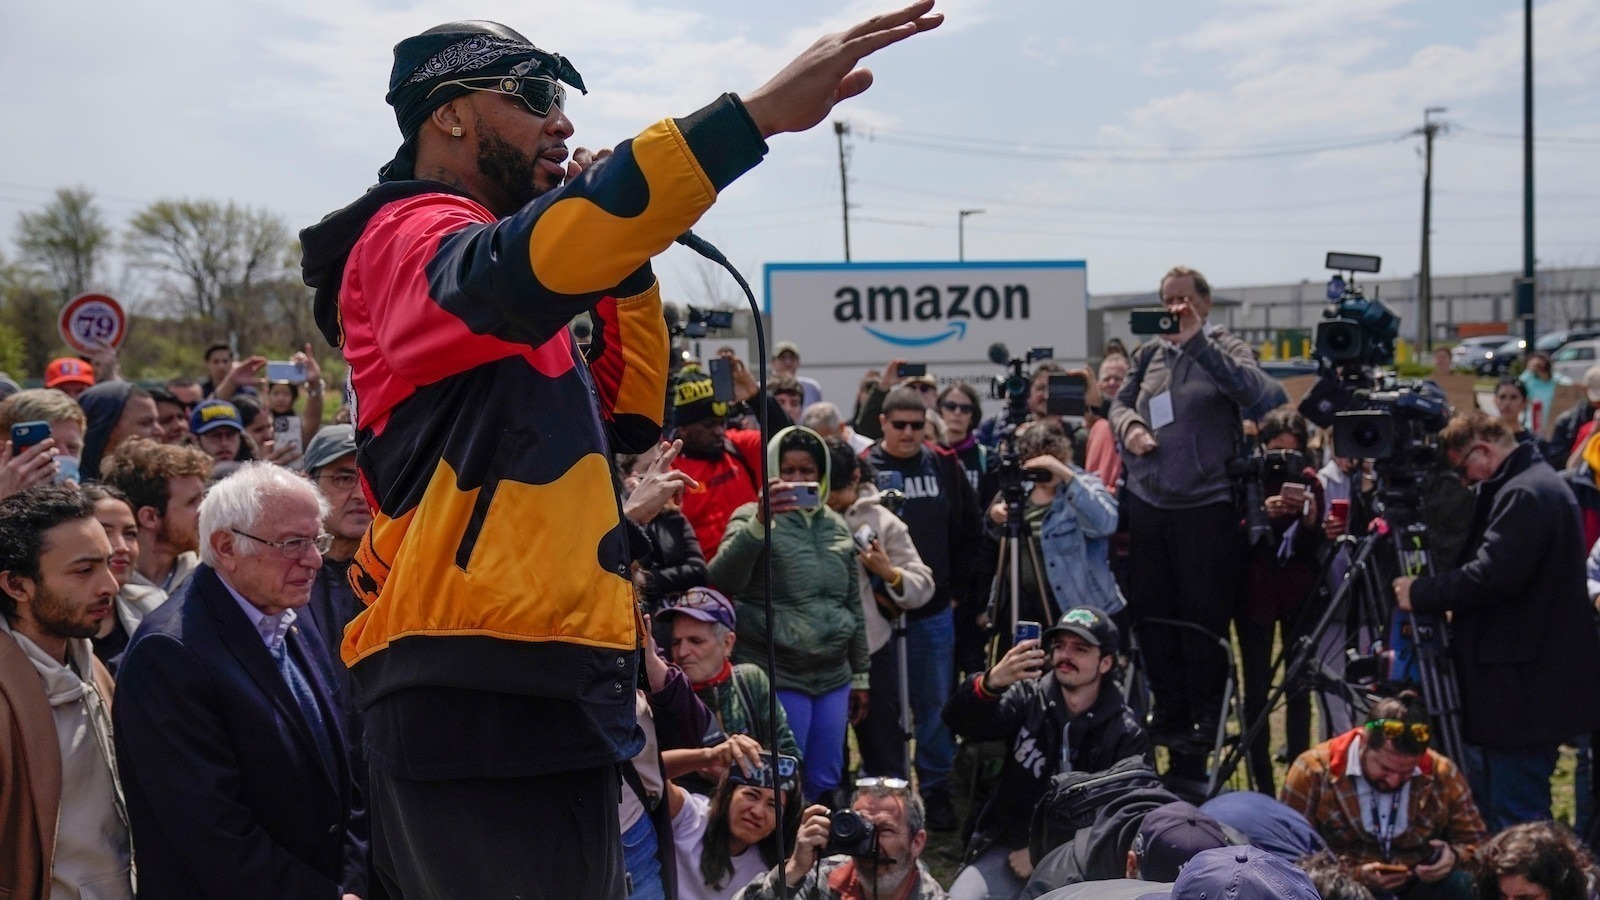 Amazon Labor Union joins Teamsters union amid strife